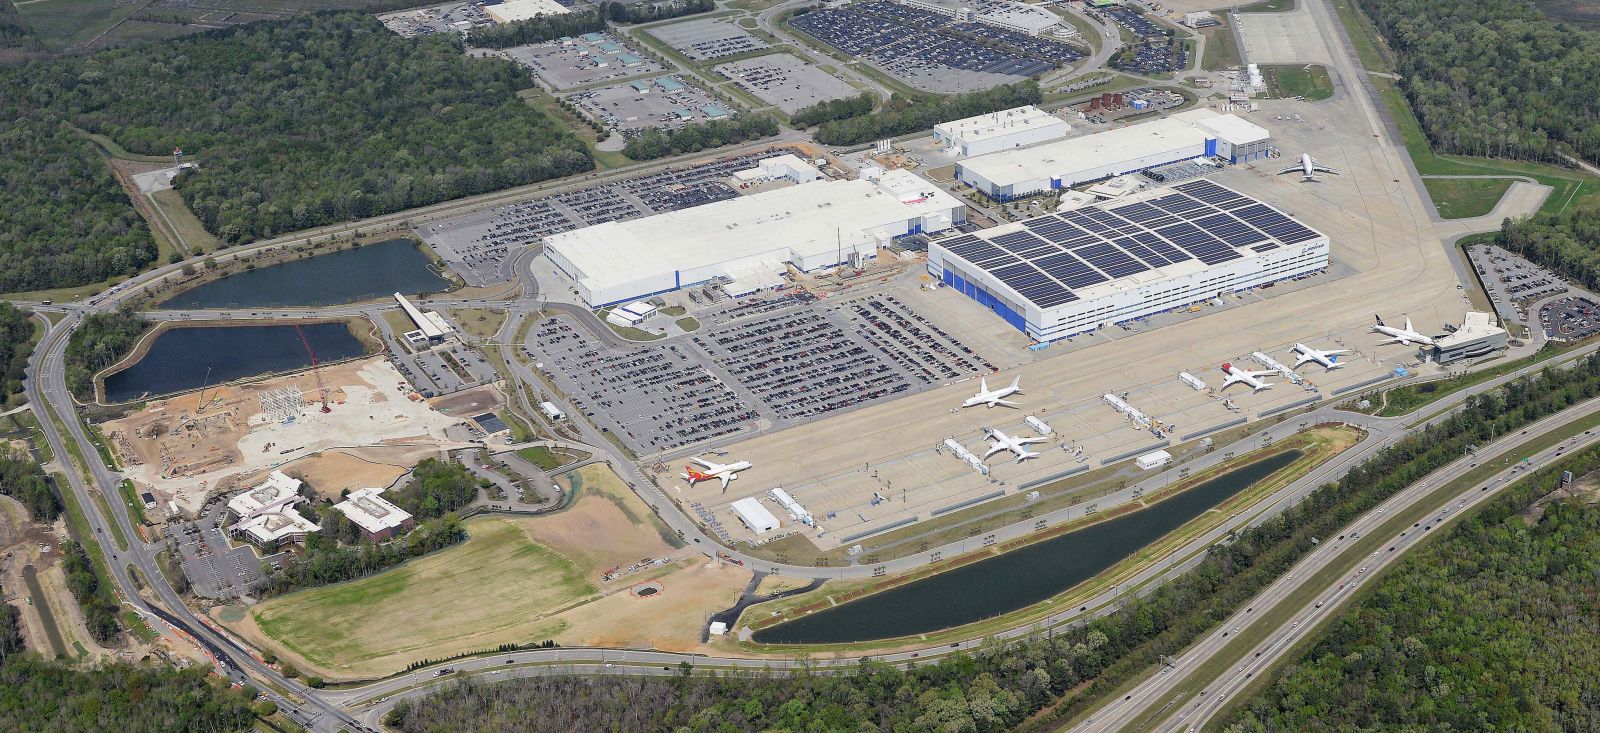 The Boeing Co. manufactures and does final assembly for 787 Dreamliners at the company's campus in North Charleston. (Photo/Boeing Co.)